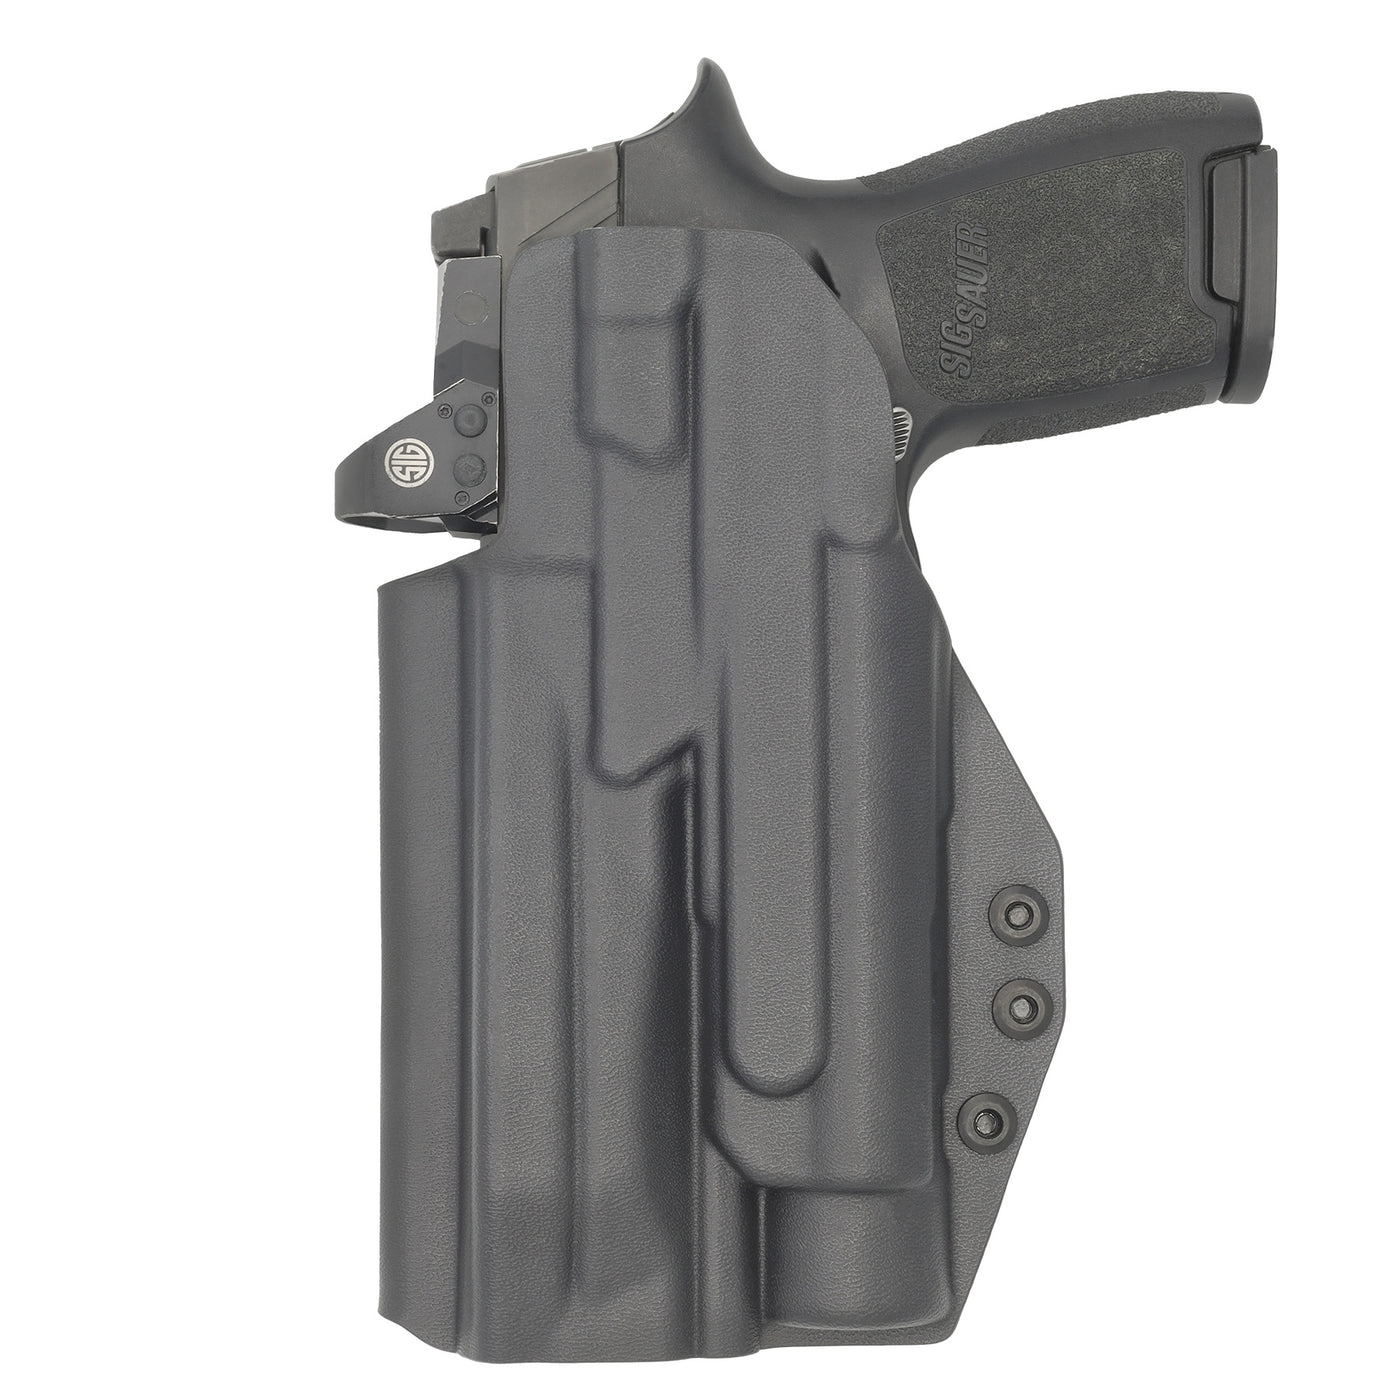 C&G Holsters Quickship IWB Tactical SIG P320/c Streamlight TLR-1 in holstered position back view